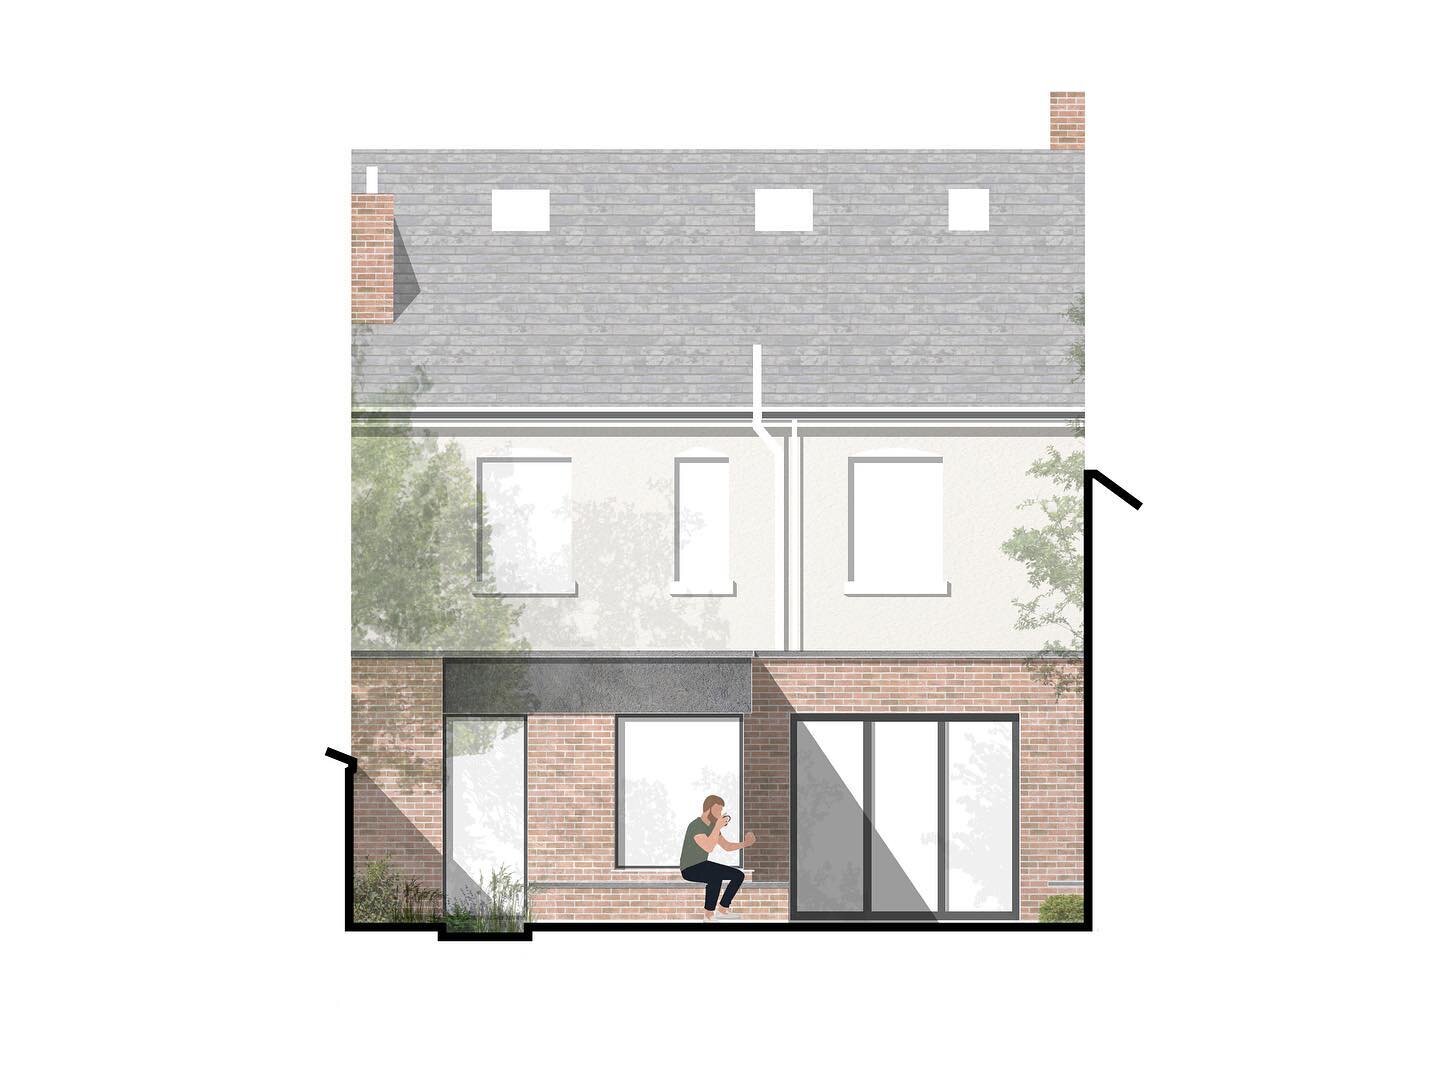 Edgbaston // BLD_146

Elevation study of our recent project in Edgbaston. Proposals seek to maximise developable area within a constrained site, whilst being considerate of natural daylight within the property. 

A combination of floor to ceiling gla